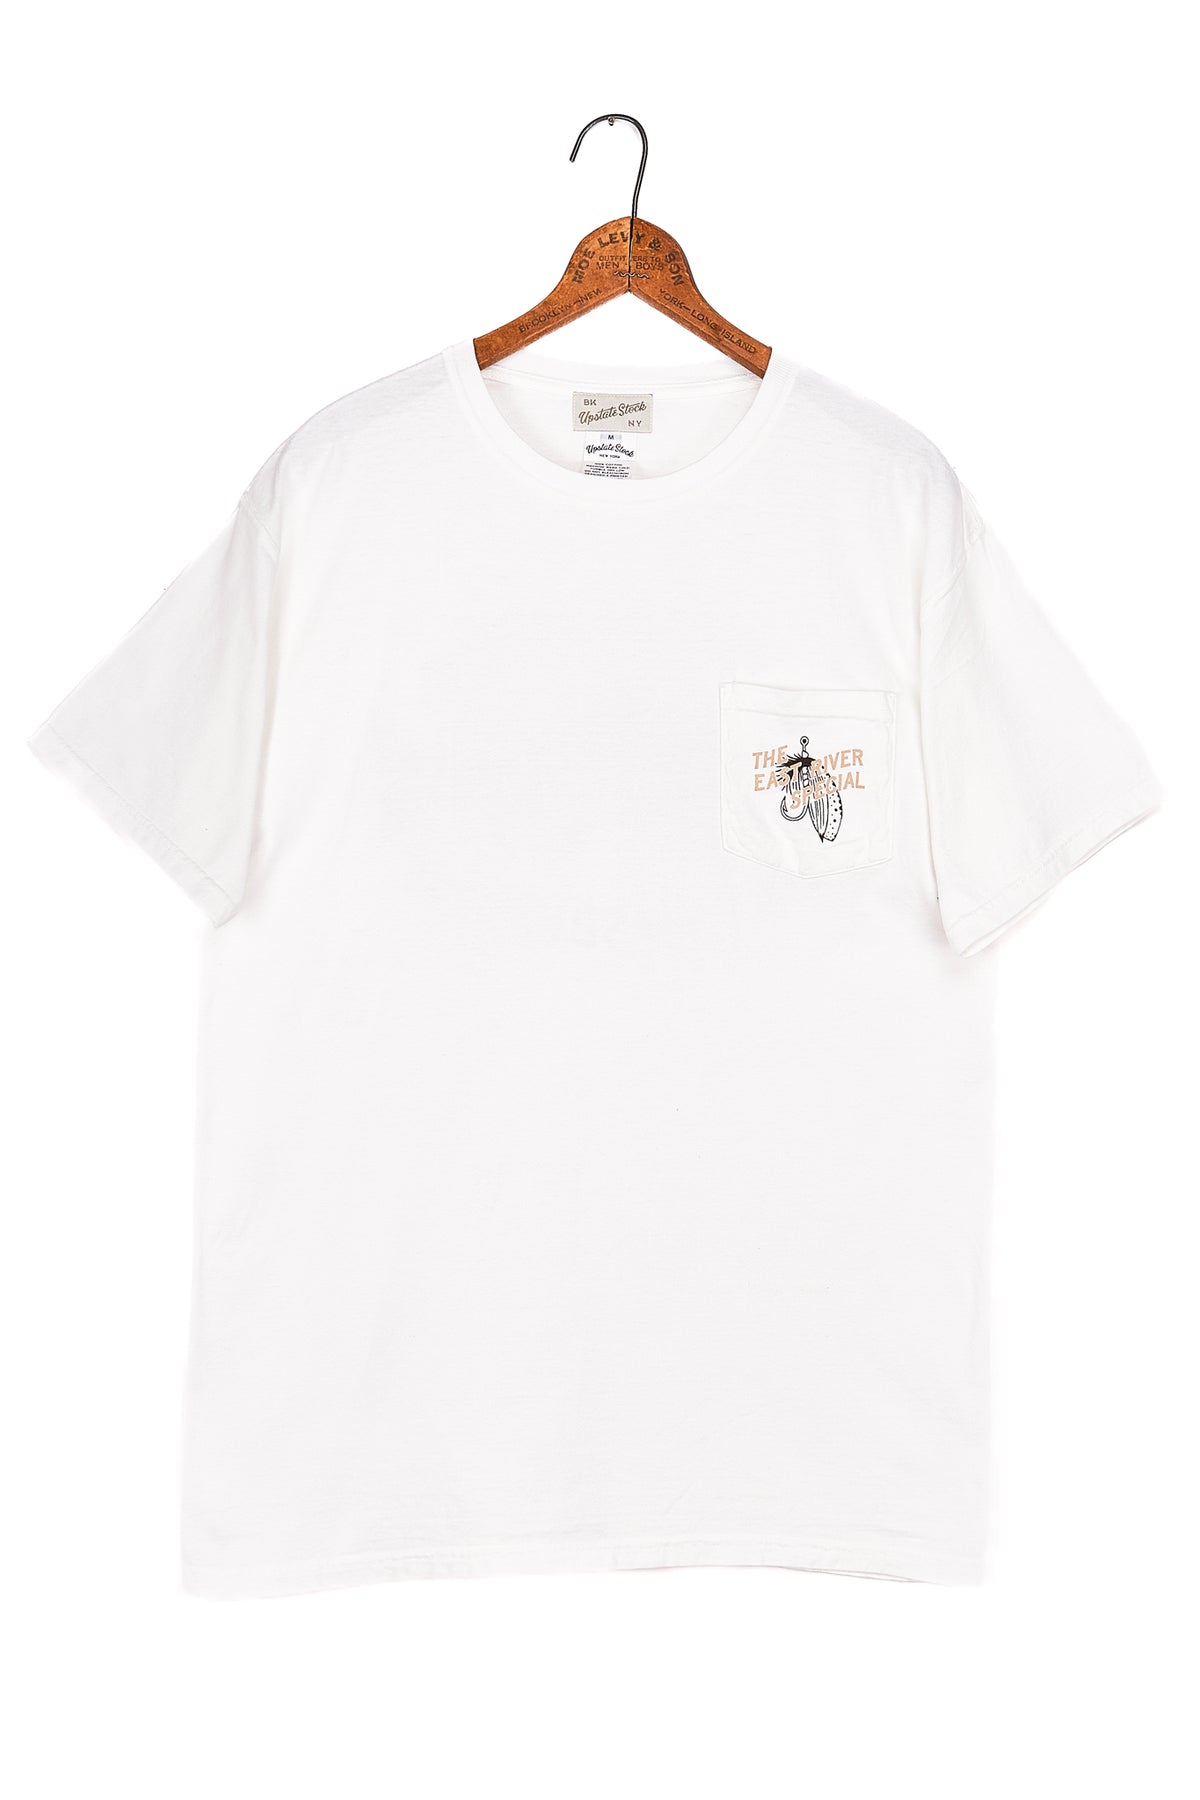 The American Cotton Pocket Tshirt - THE EAST RIVER SPECIAL